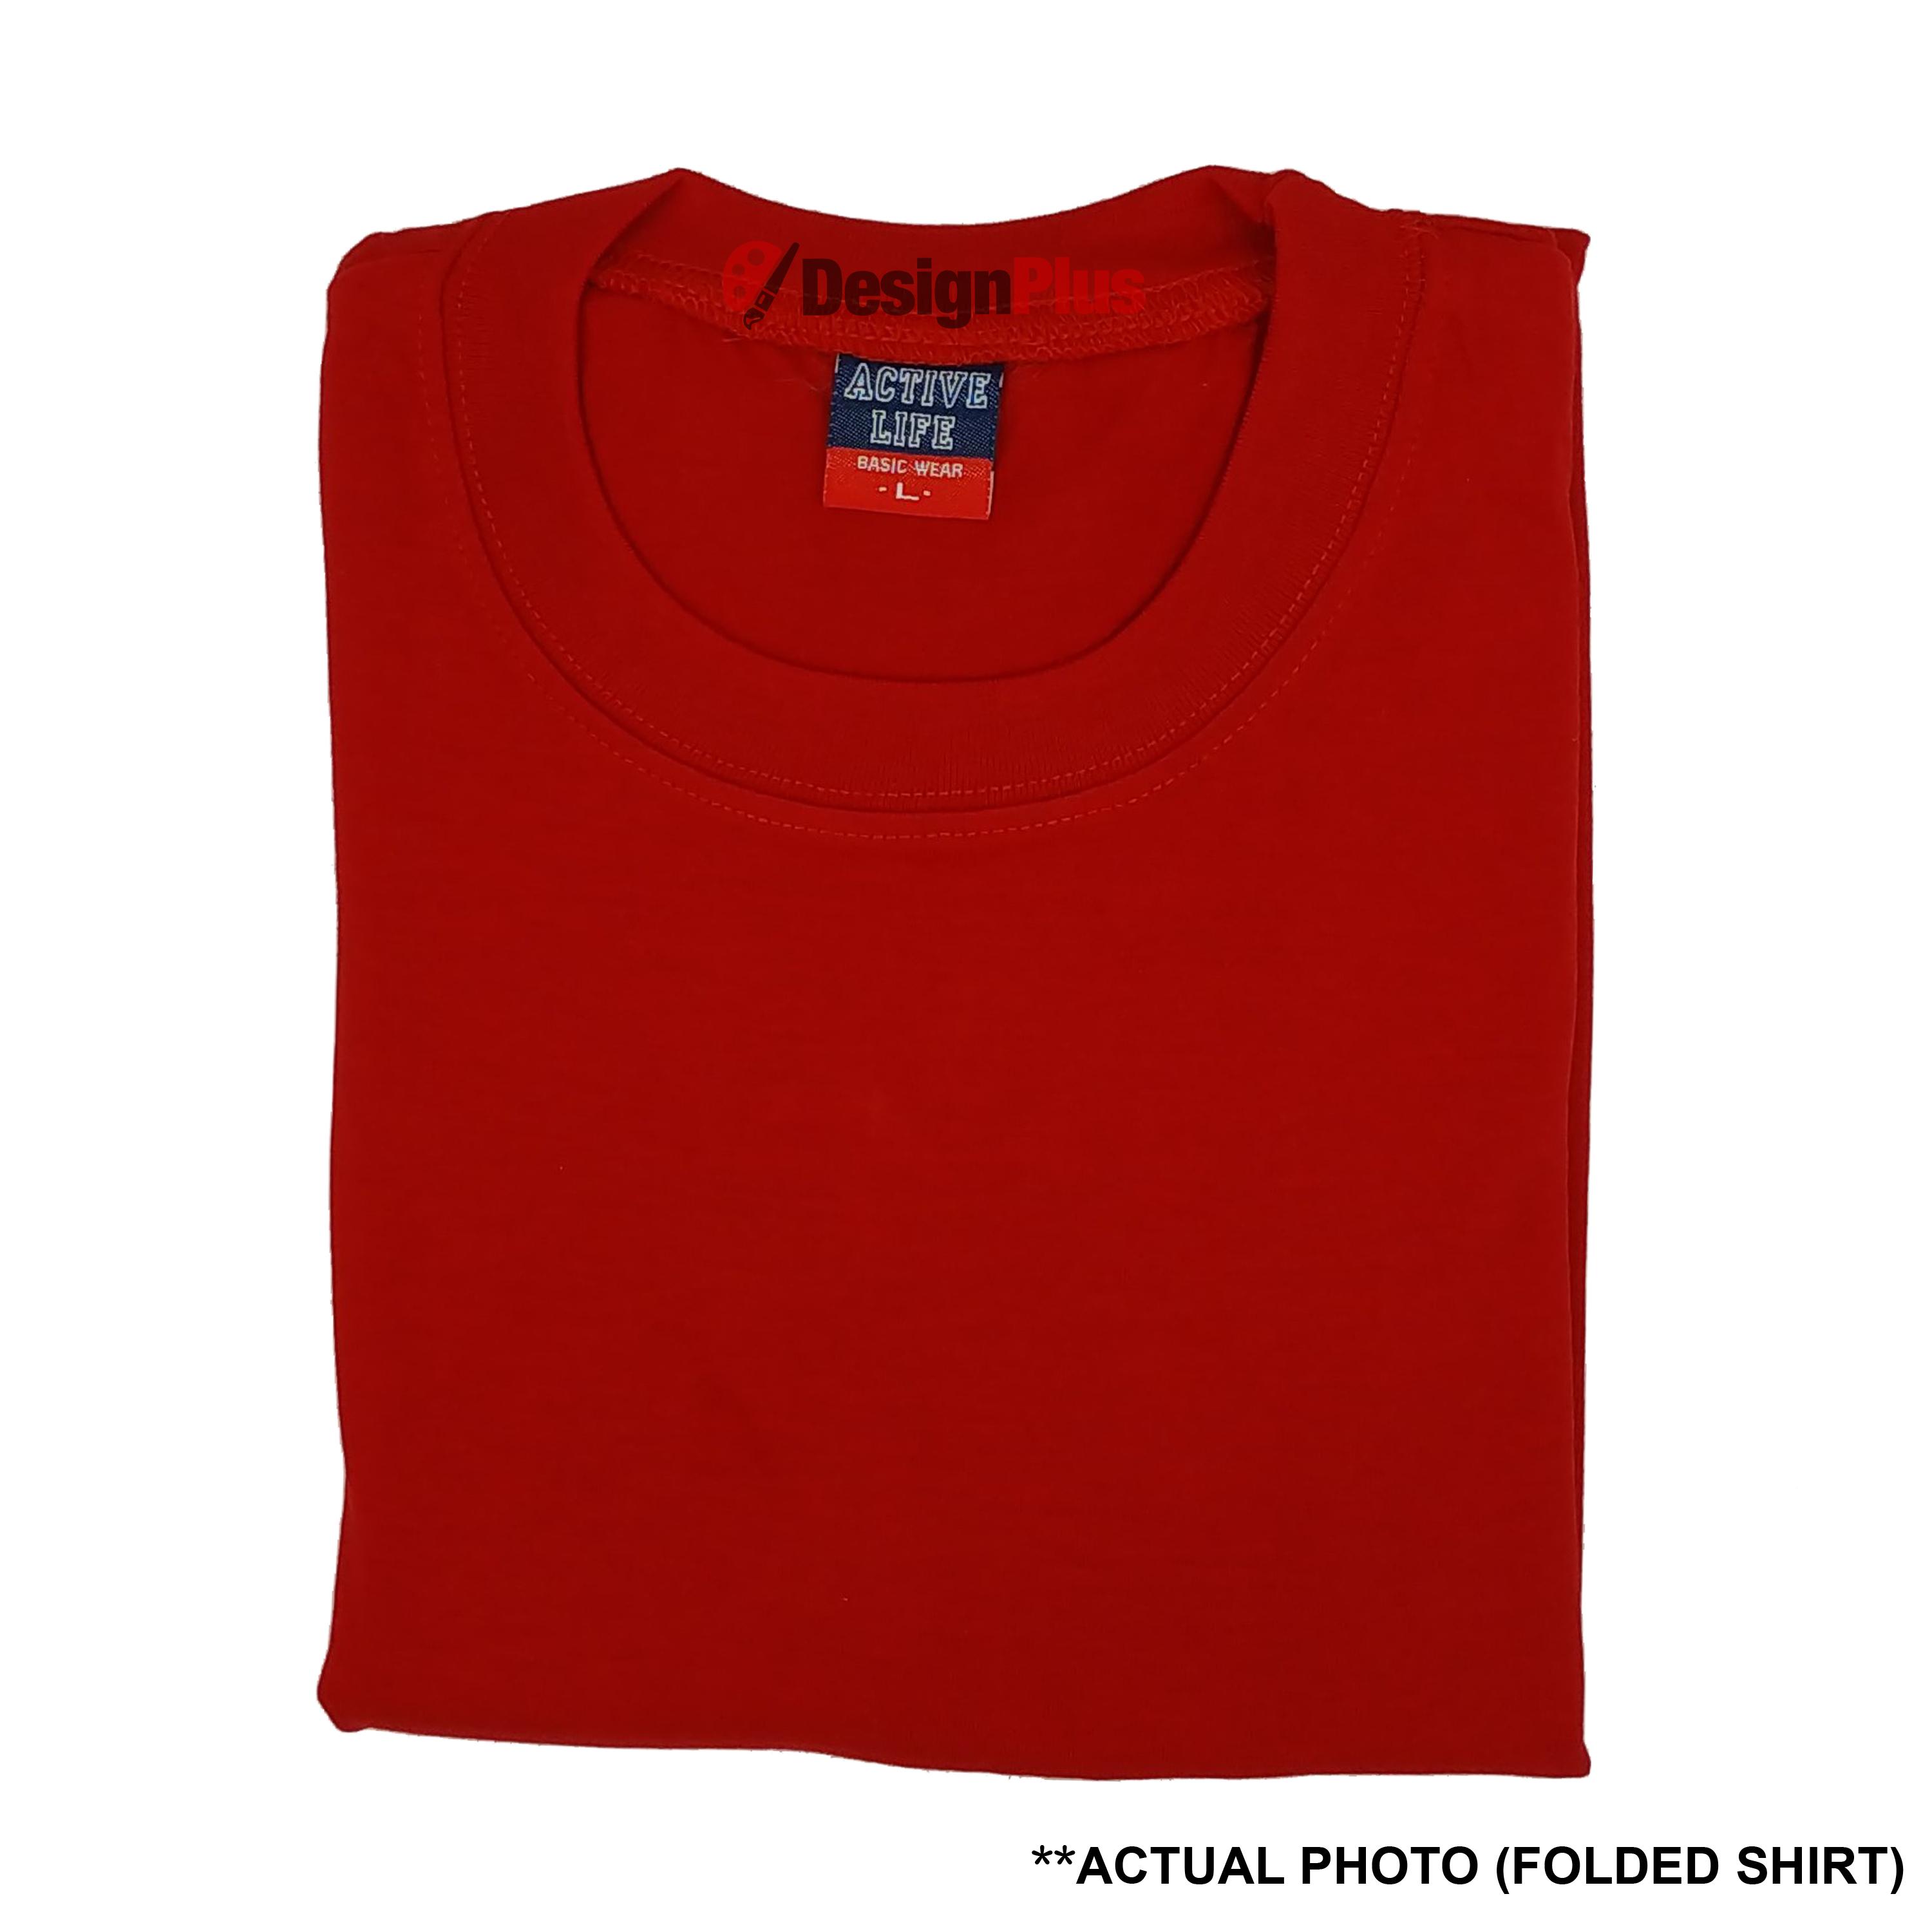 red color tshirt